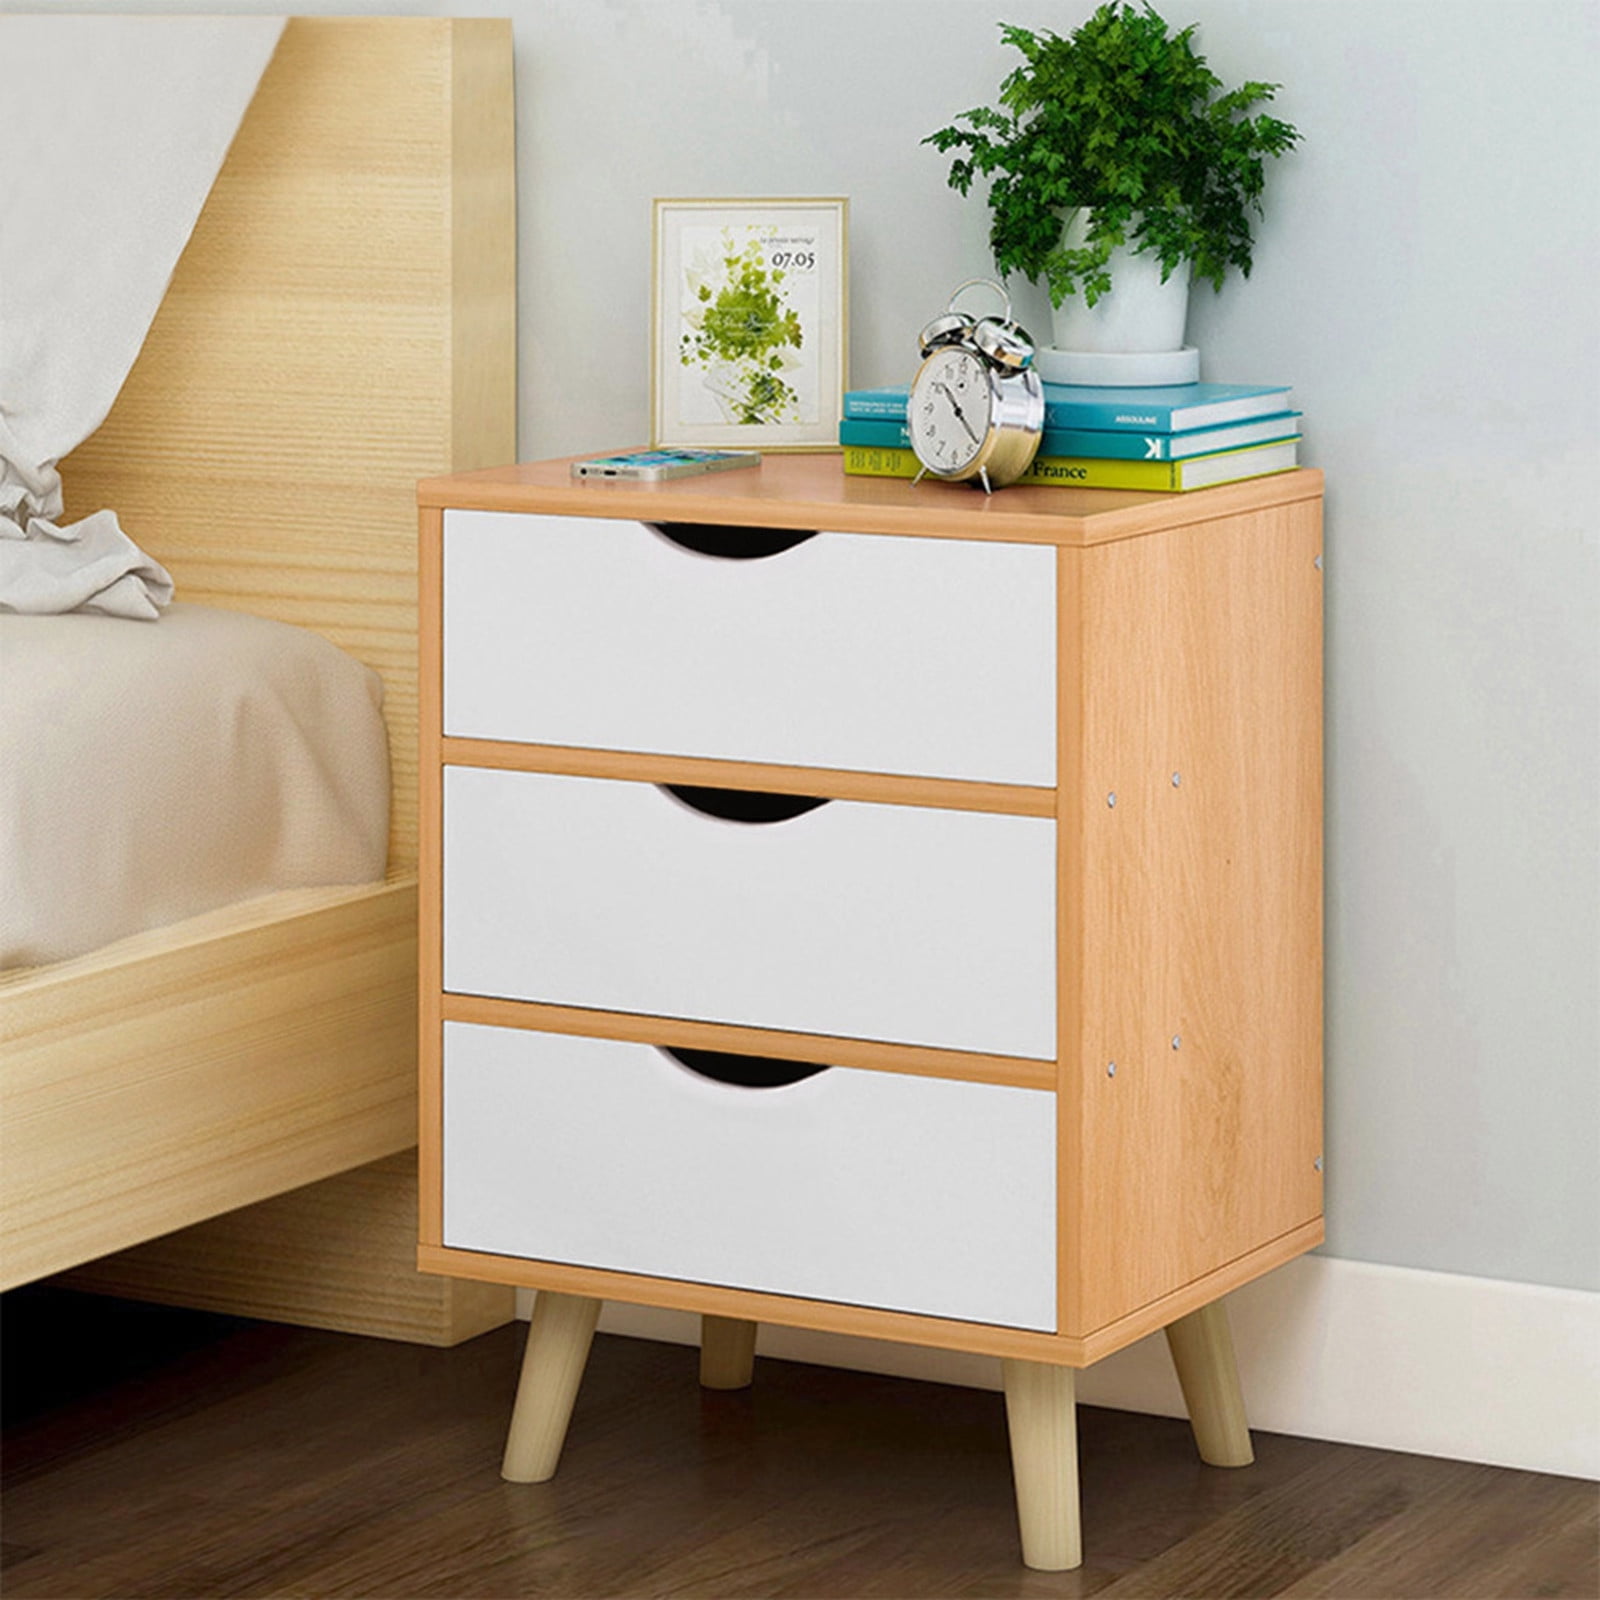 Details about   3 Drawers Locking Nightstand Storage Wood End Table Bedside Organizer Solidwood 